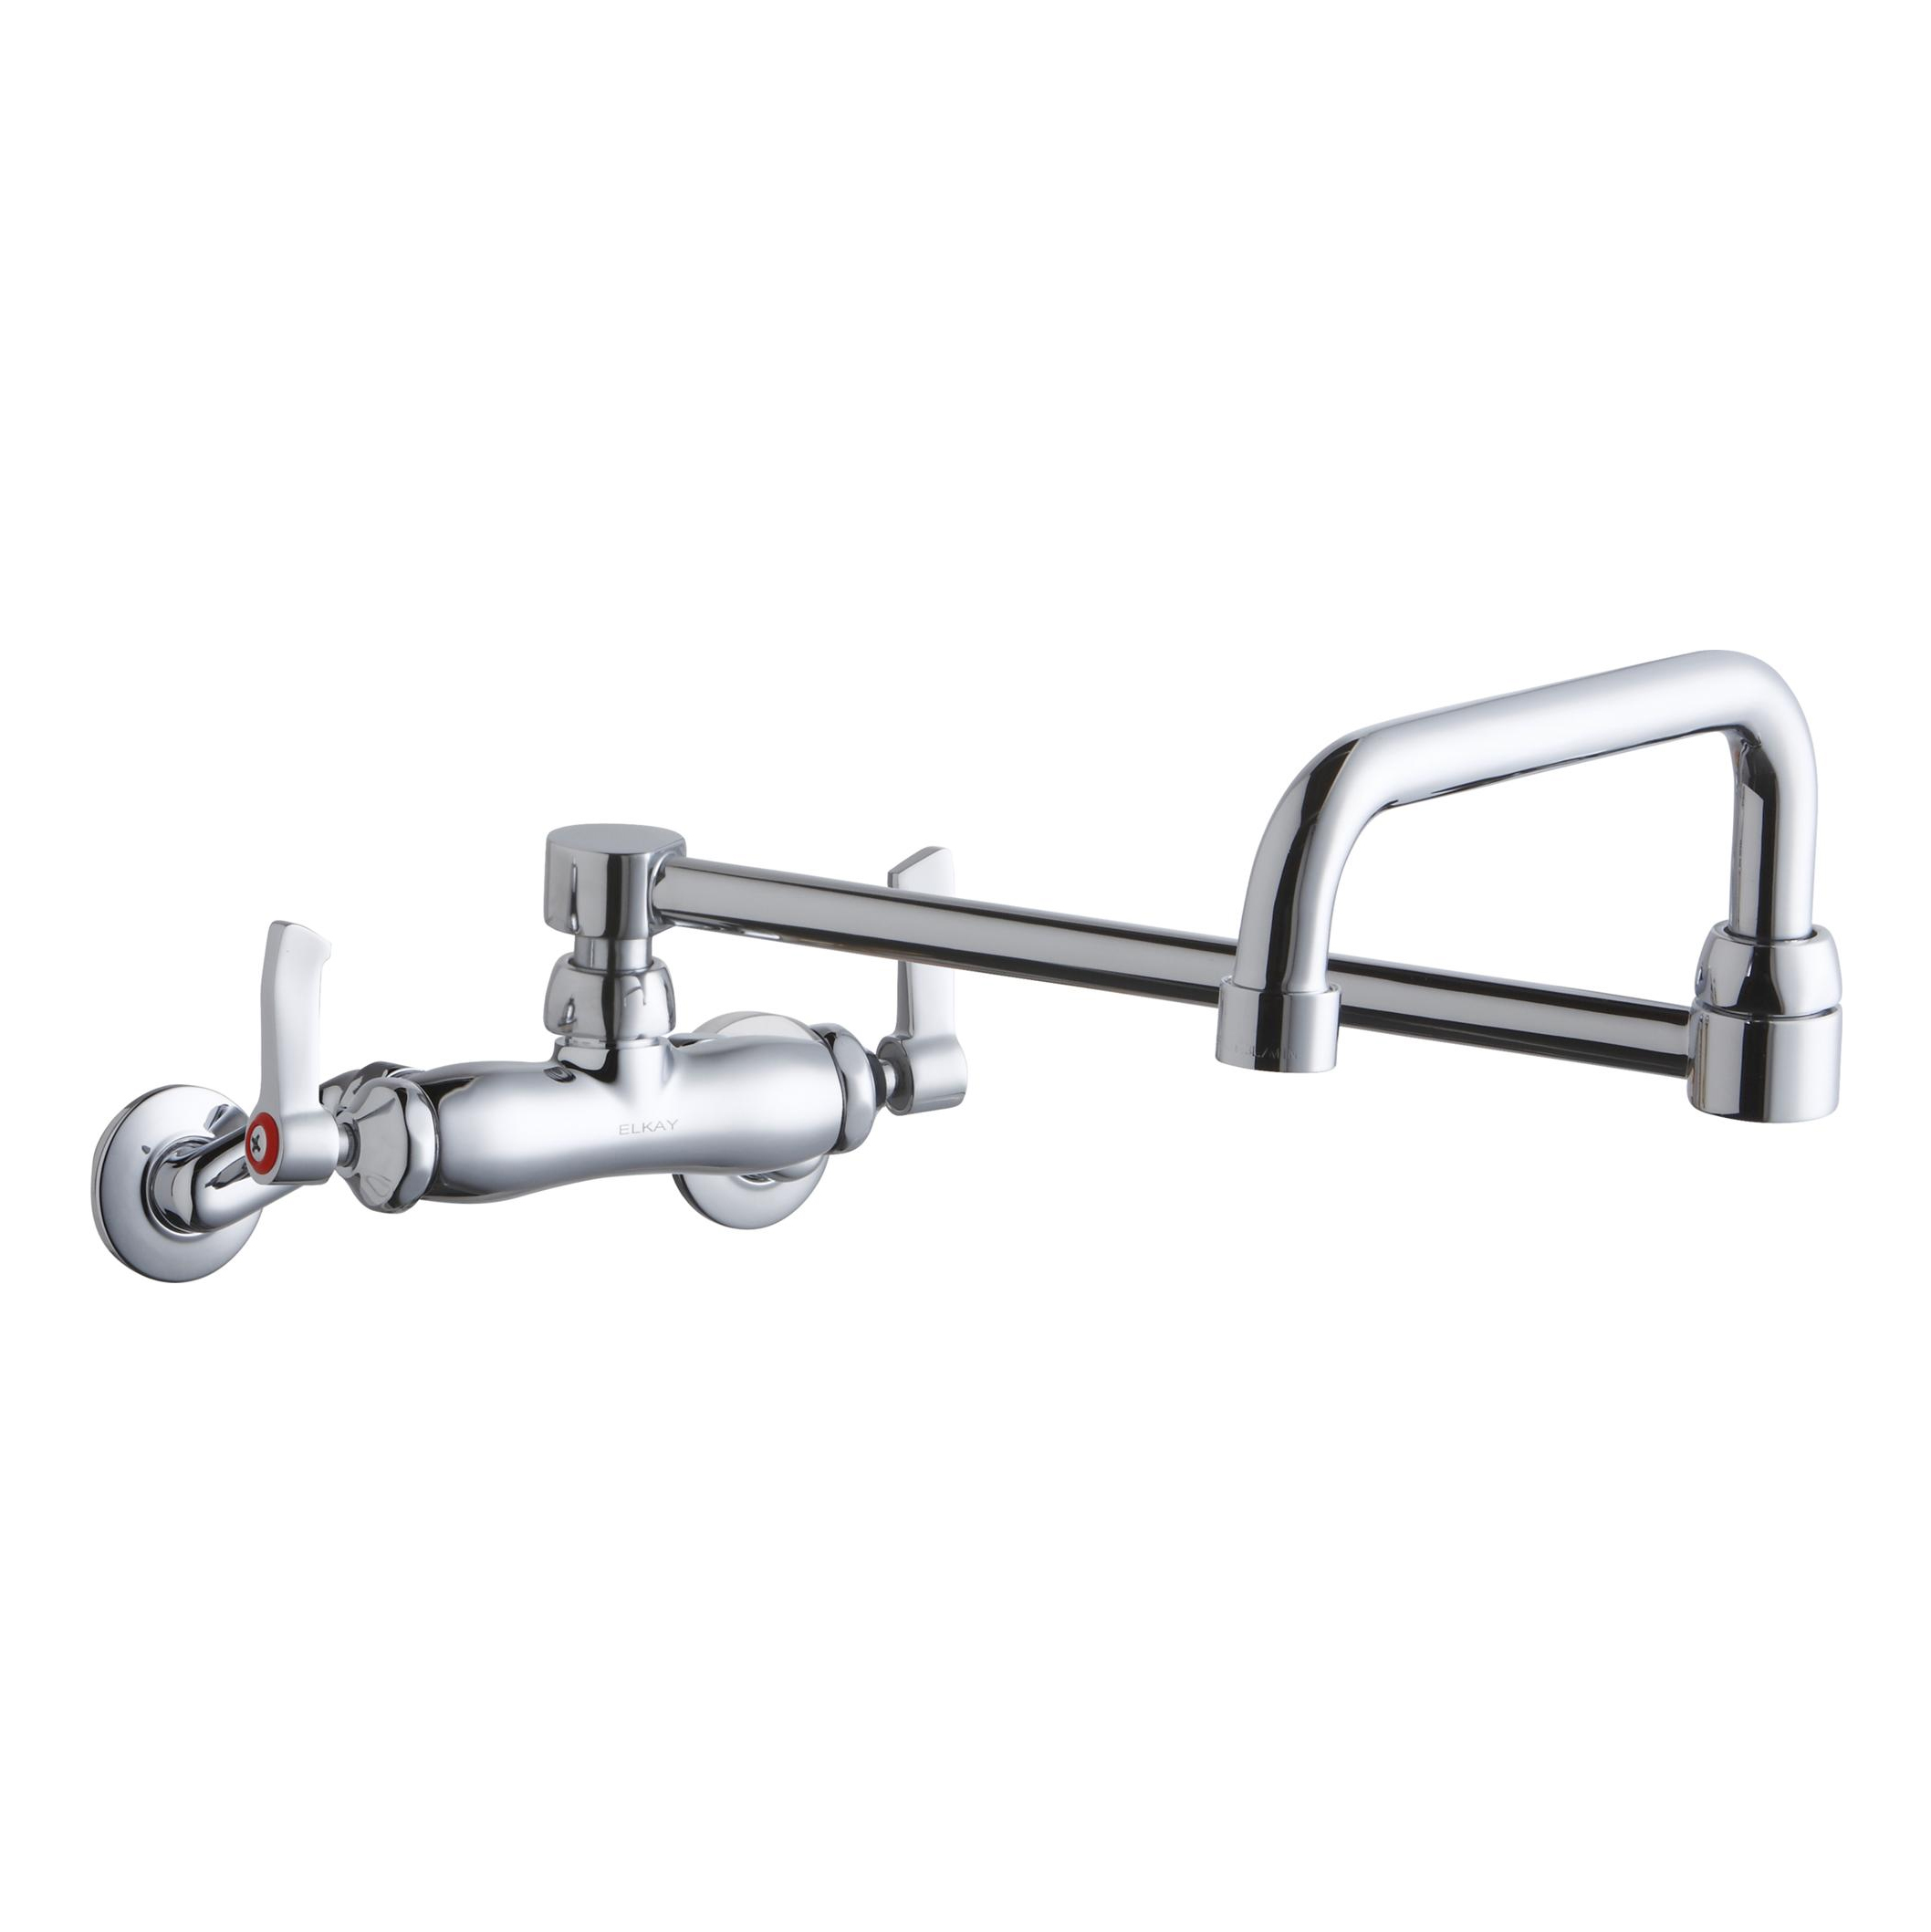 Wall Mount Faucet W/Double Swing Spout In Chrome